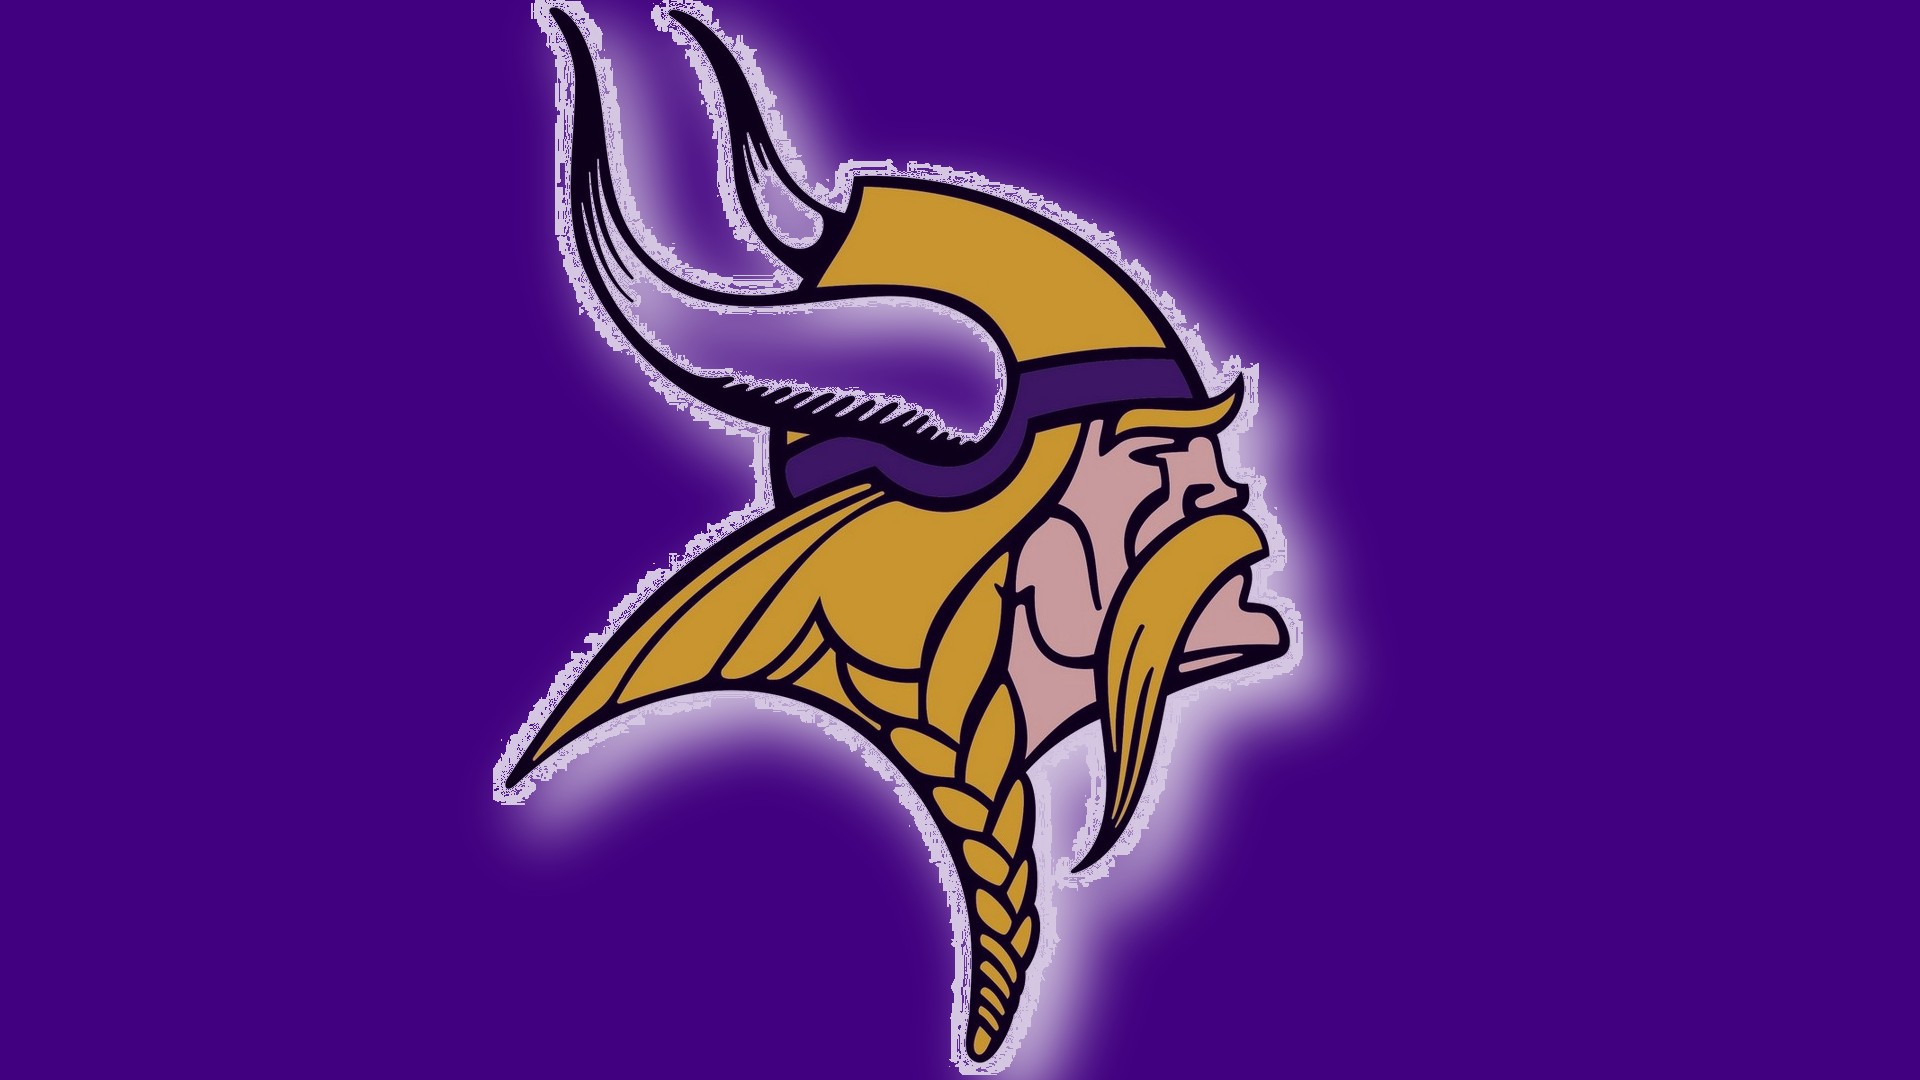 Vikings Wallpapers Images, Graphics, Comments And Pictures ...